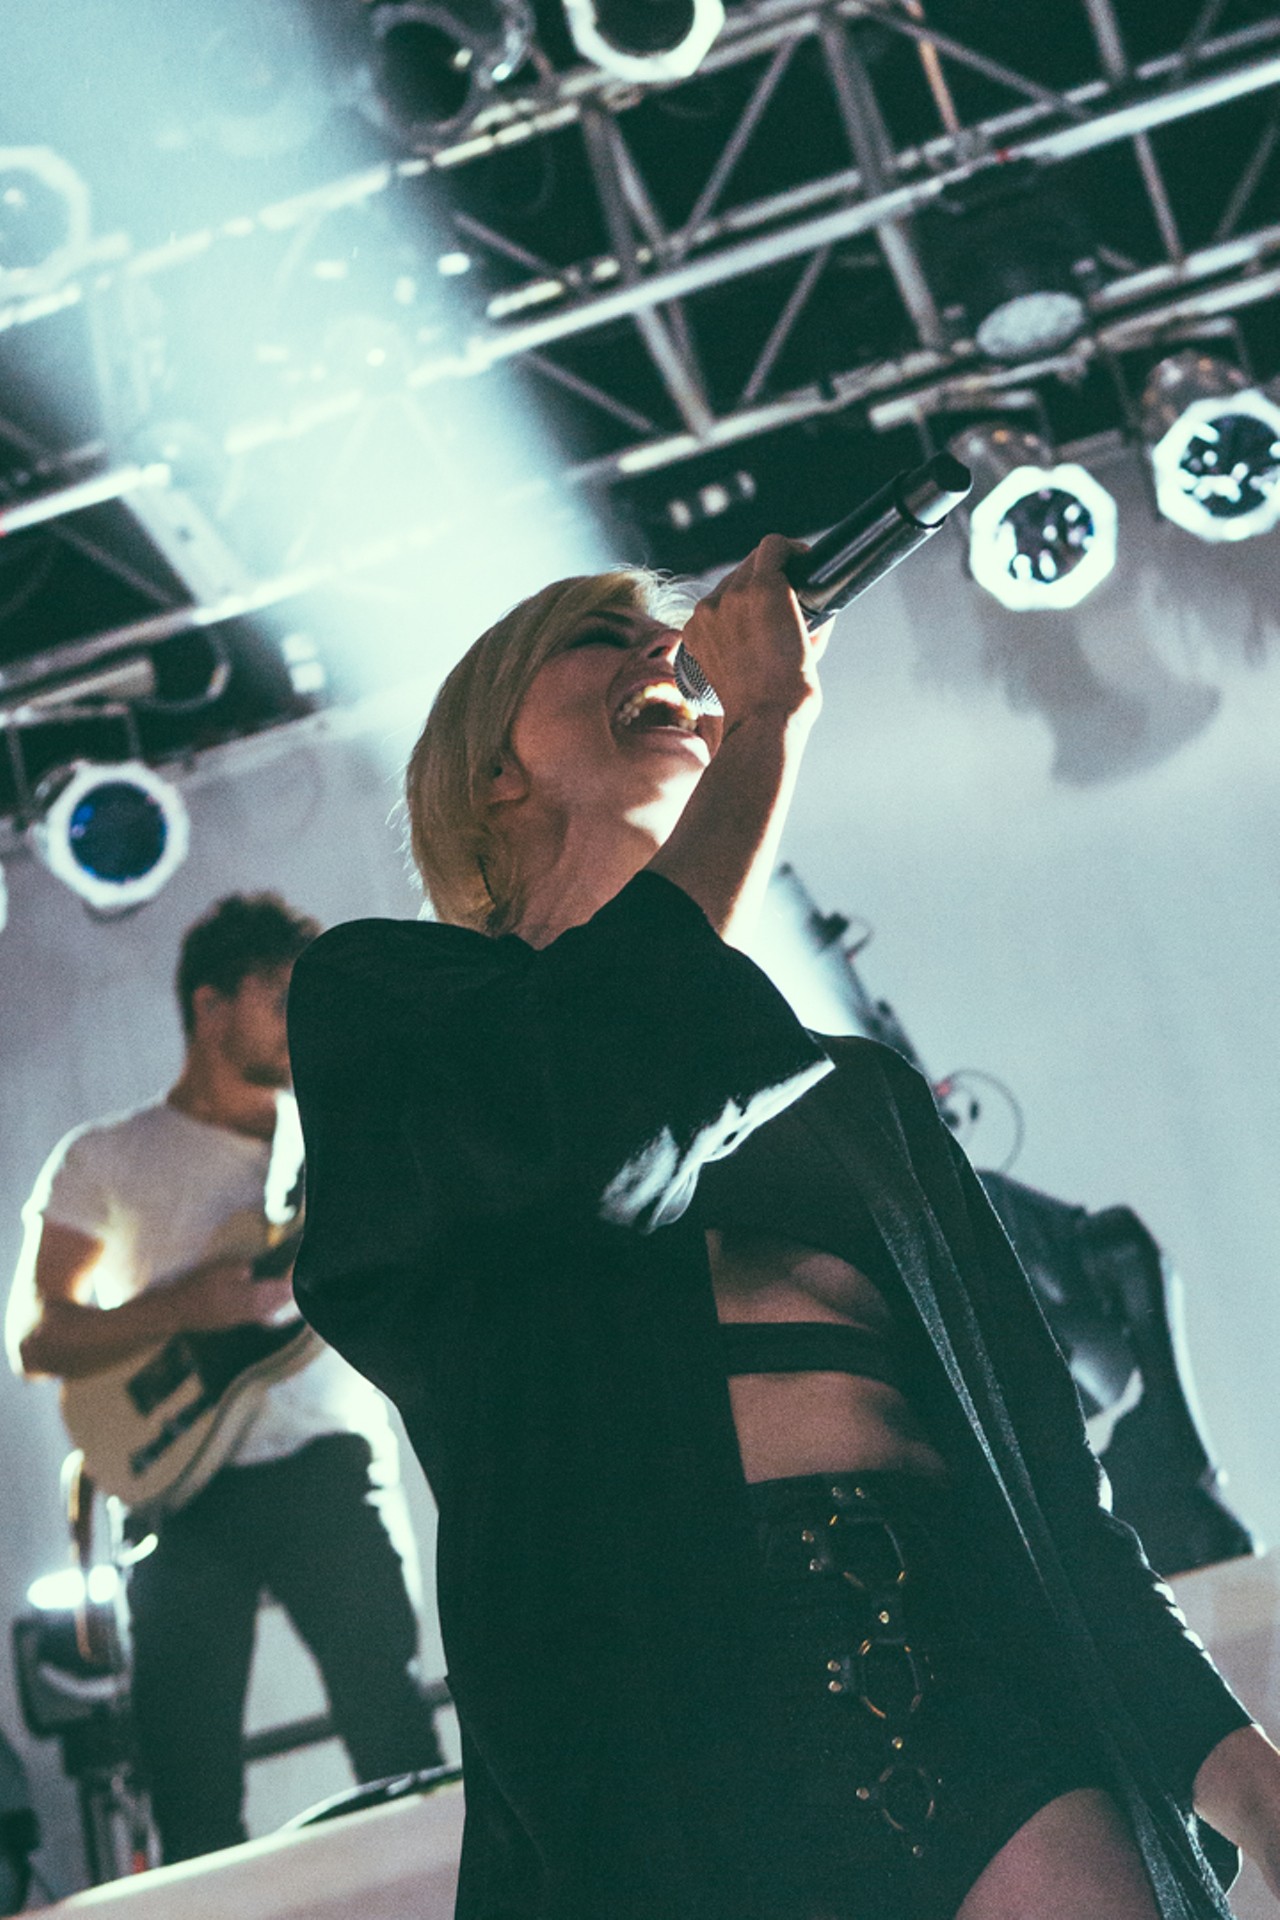 Phantogram Performing at House of Blues